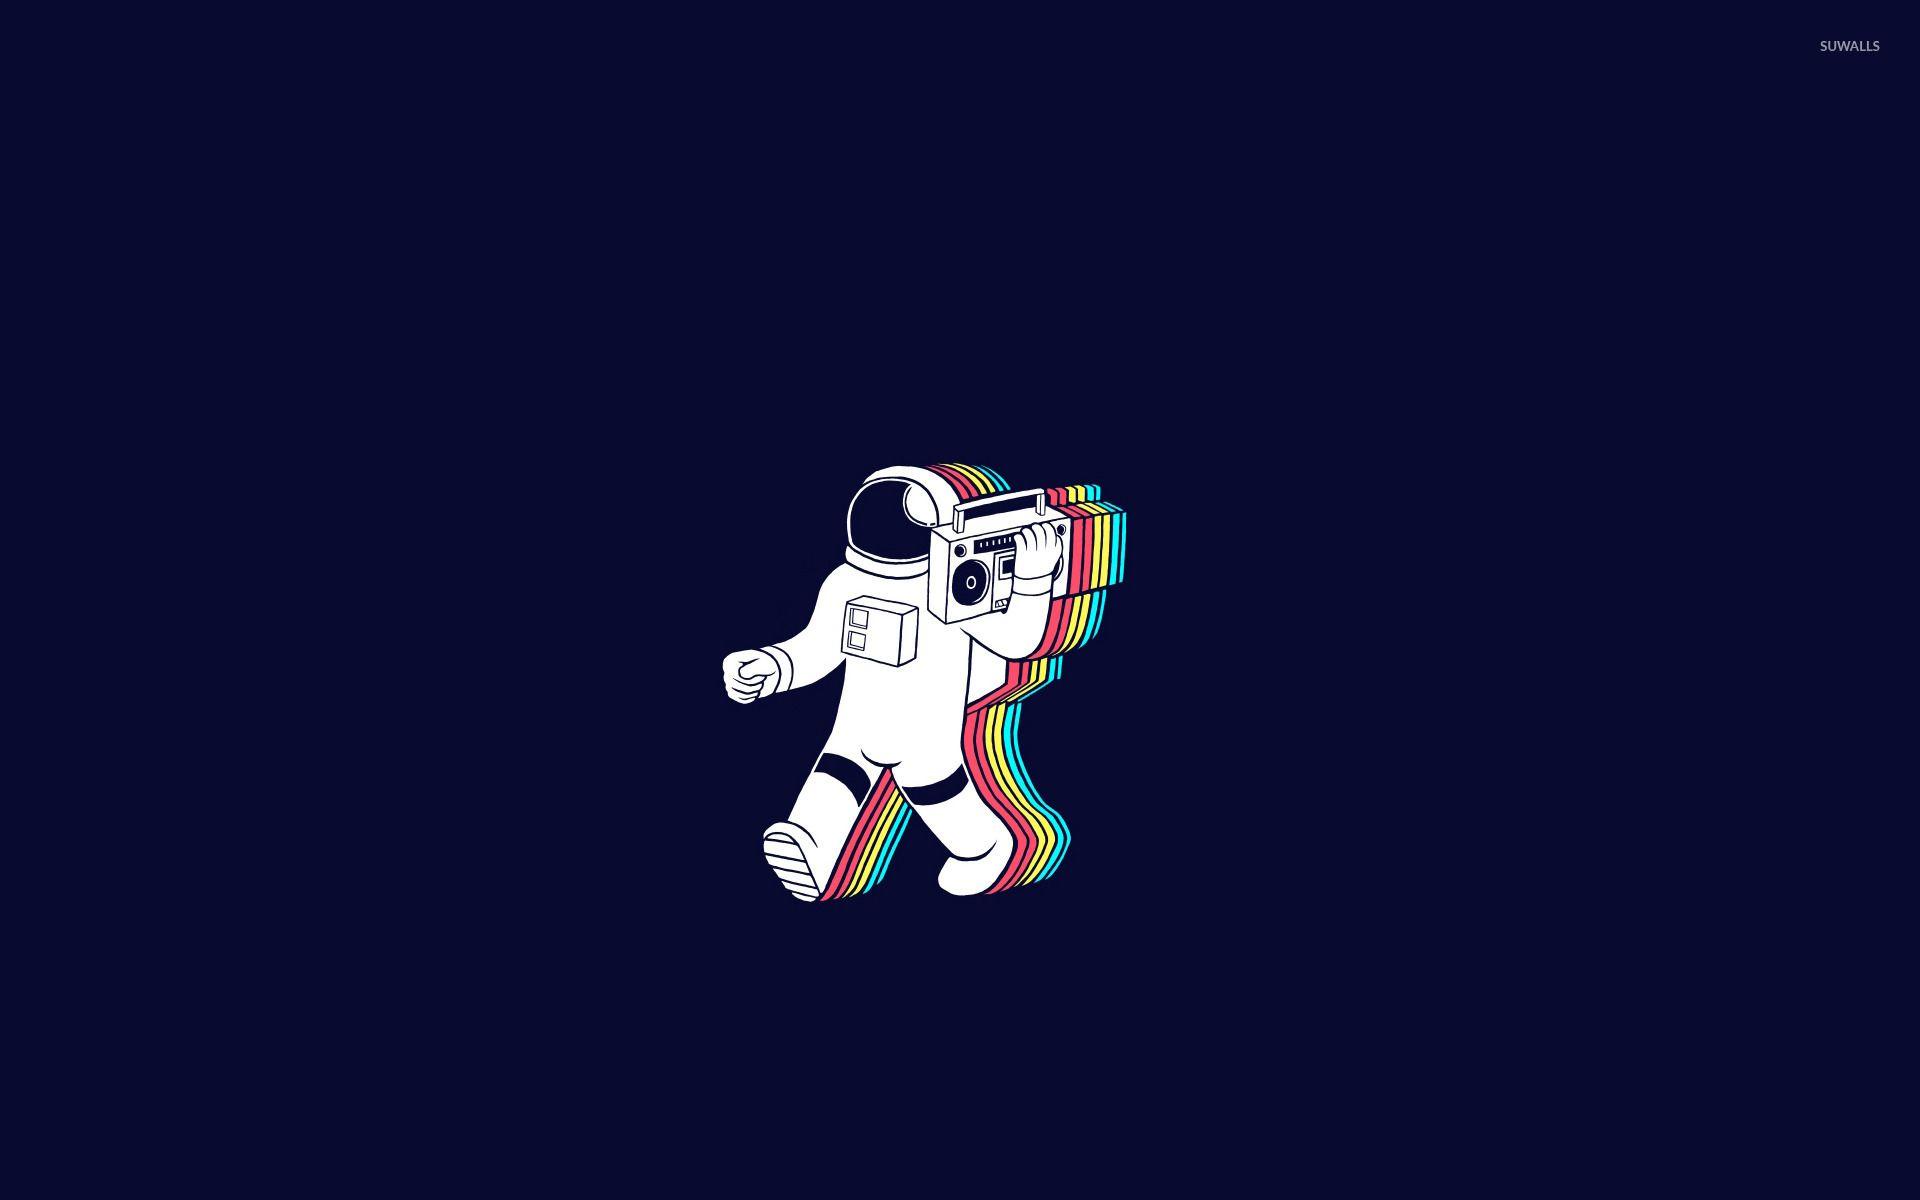 Party Wallpaper HD Background. Astronaut wallpaper, Aesthetic